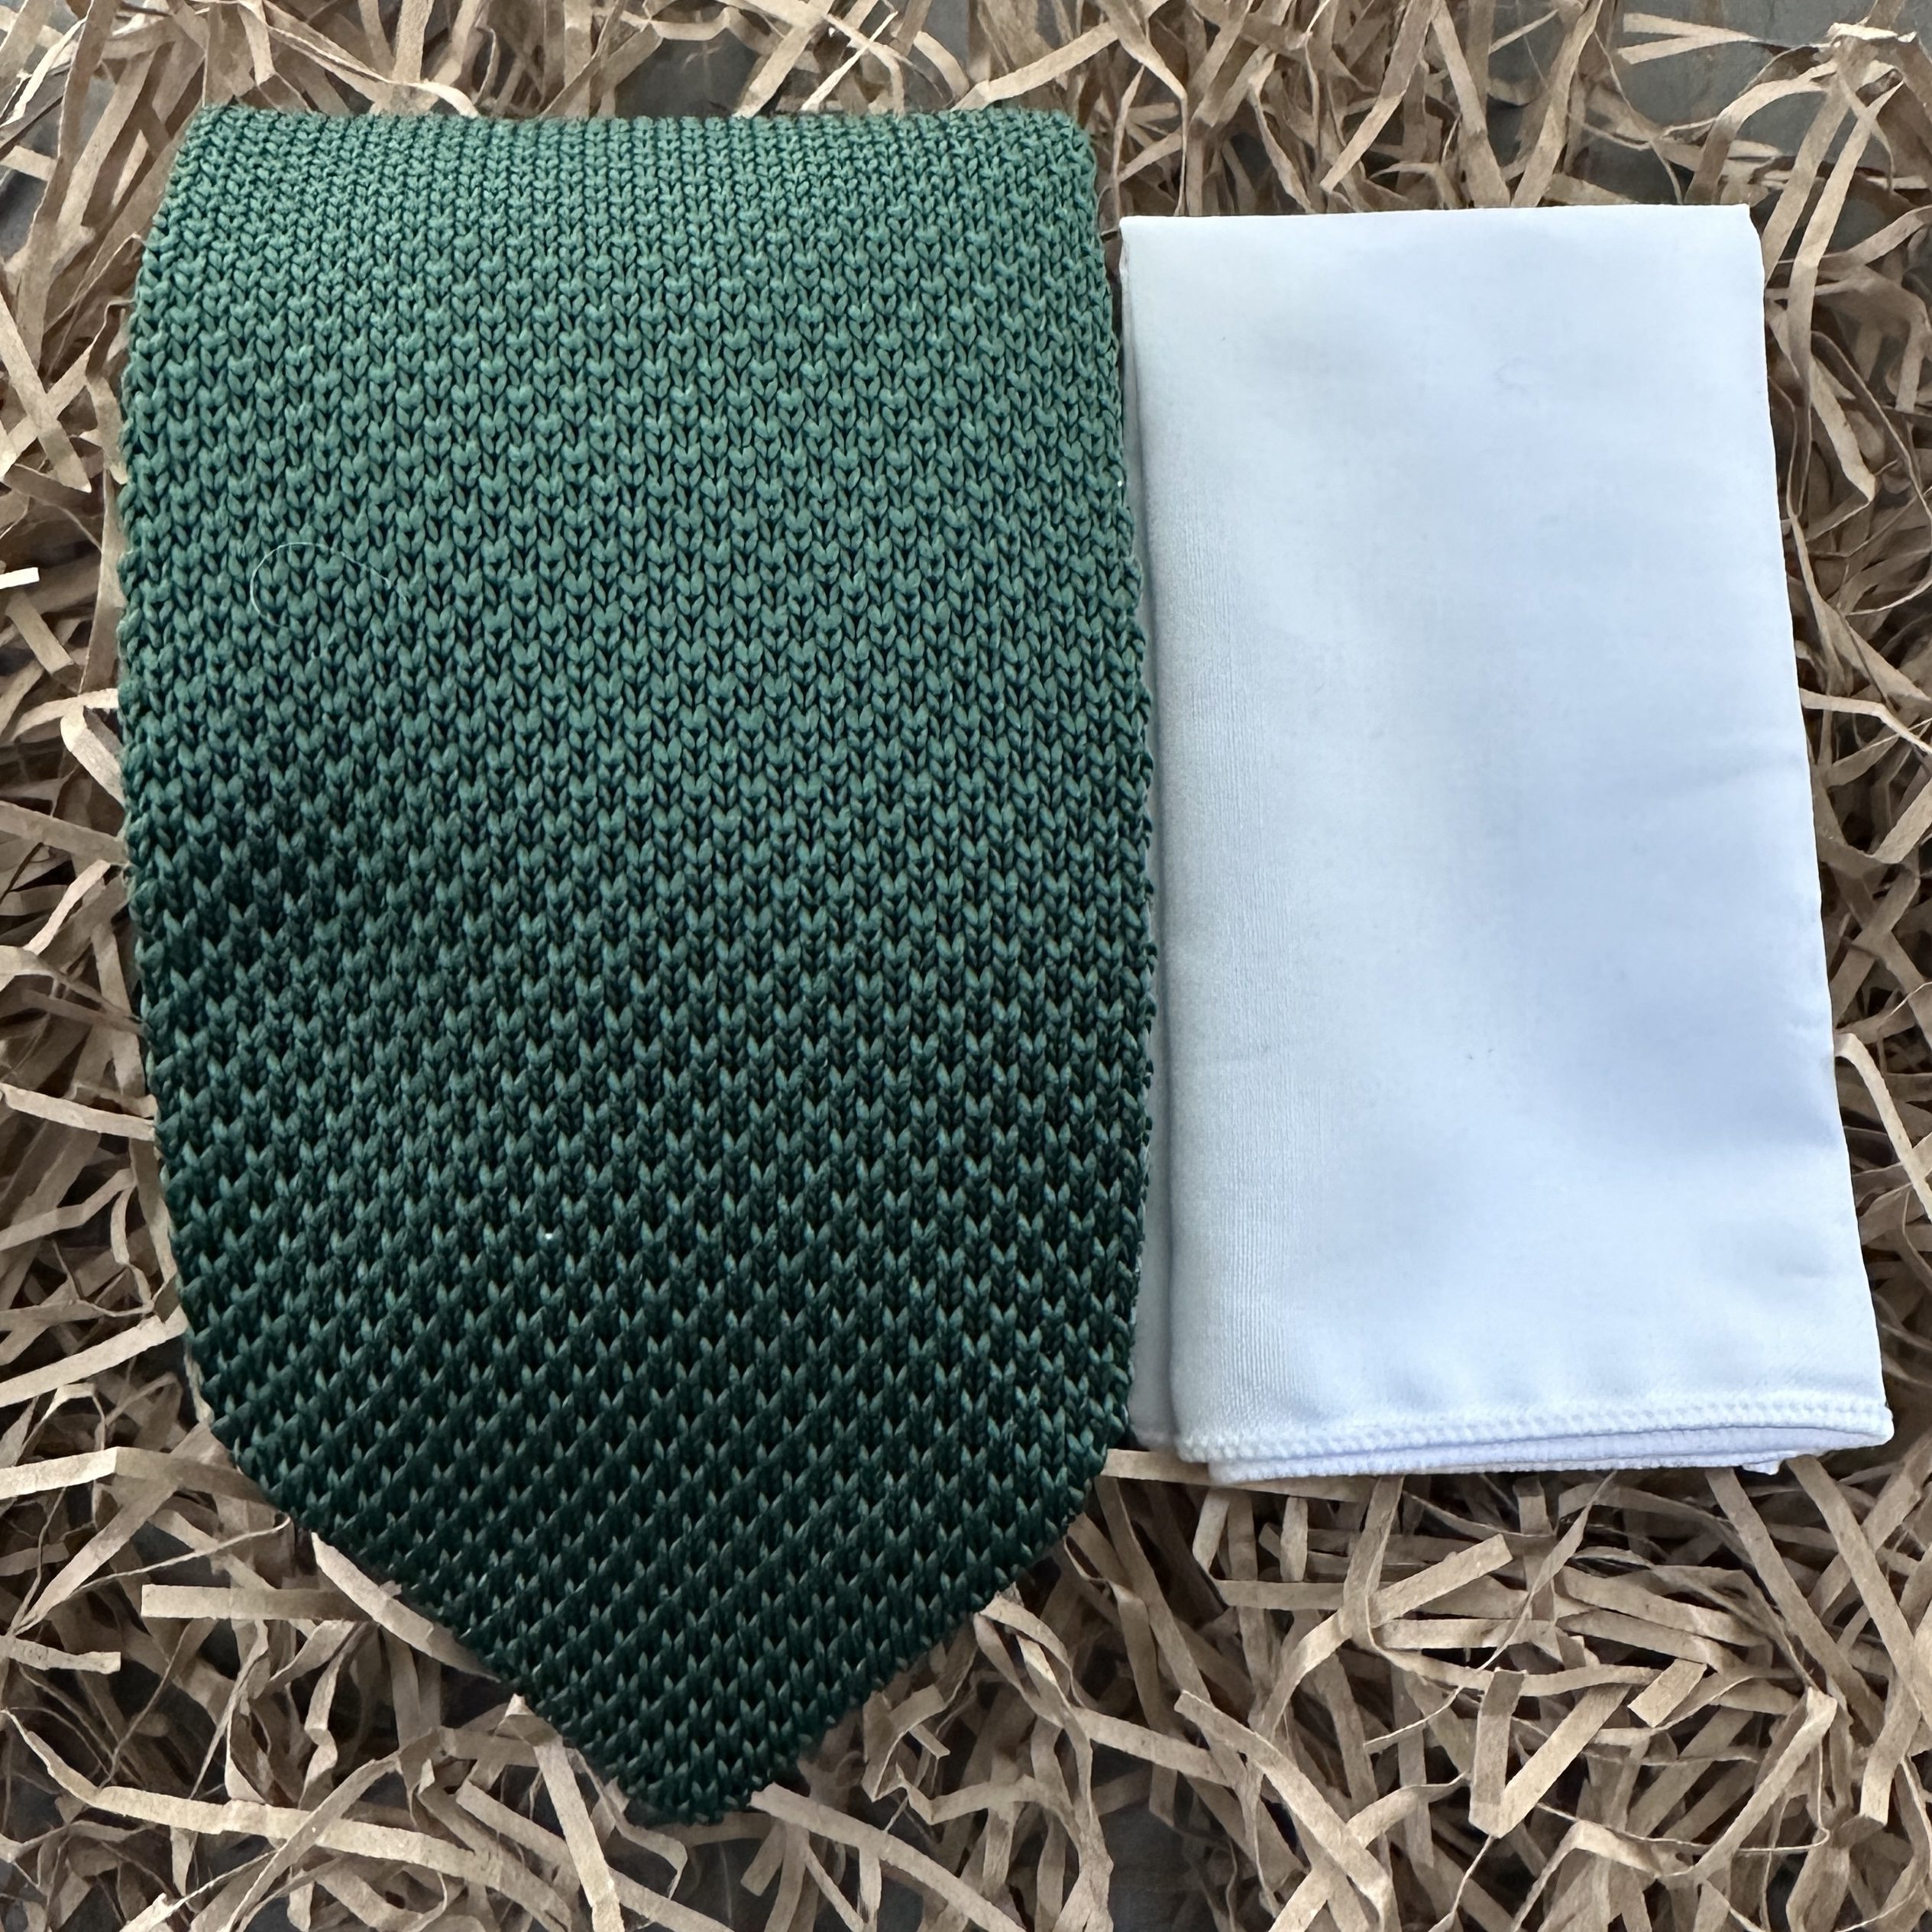 A green men's knitted necktie and white handkerchief for men's gifts, groomsmen gifts and wedding attire. The set comes with gift wrapping and so is ideal for men's gifts.